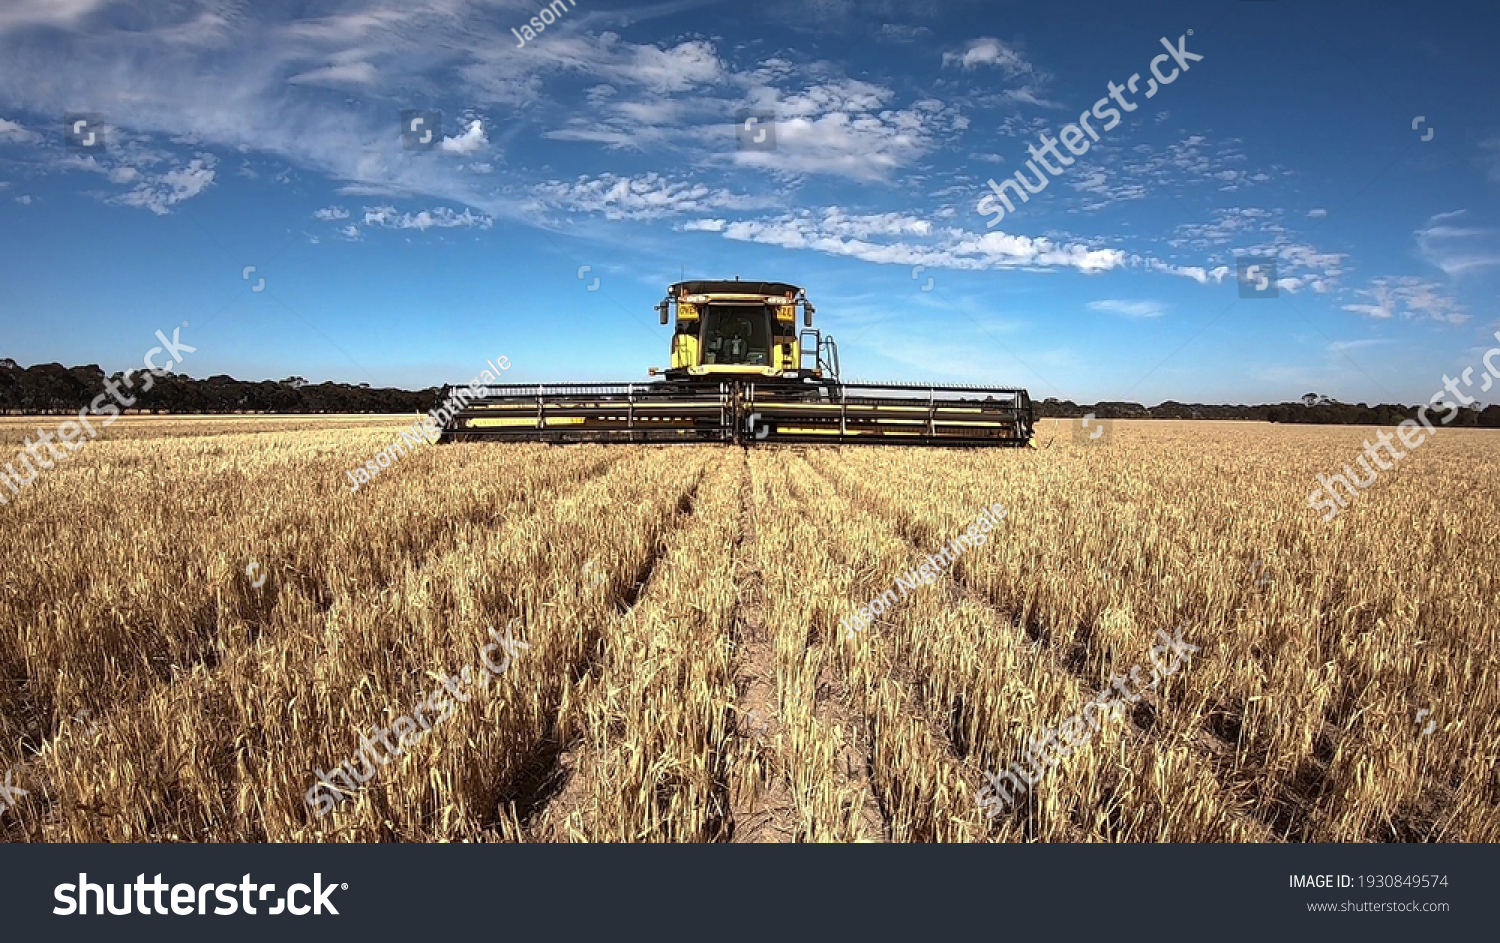 New Holland Combine Harvester Harvesting Barley in Outback Western Australia with a big blue sky and white clouds. Front view of the agricultural machine in action. #1930849574